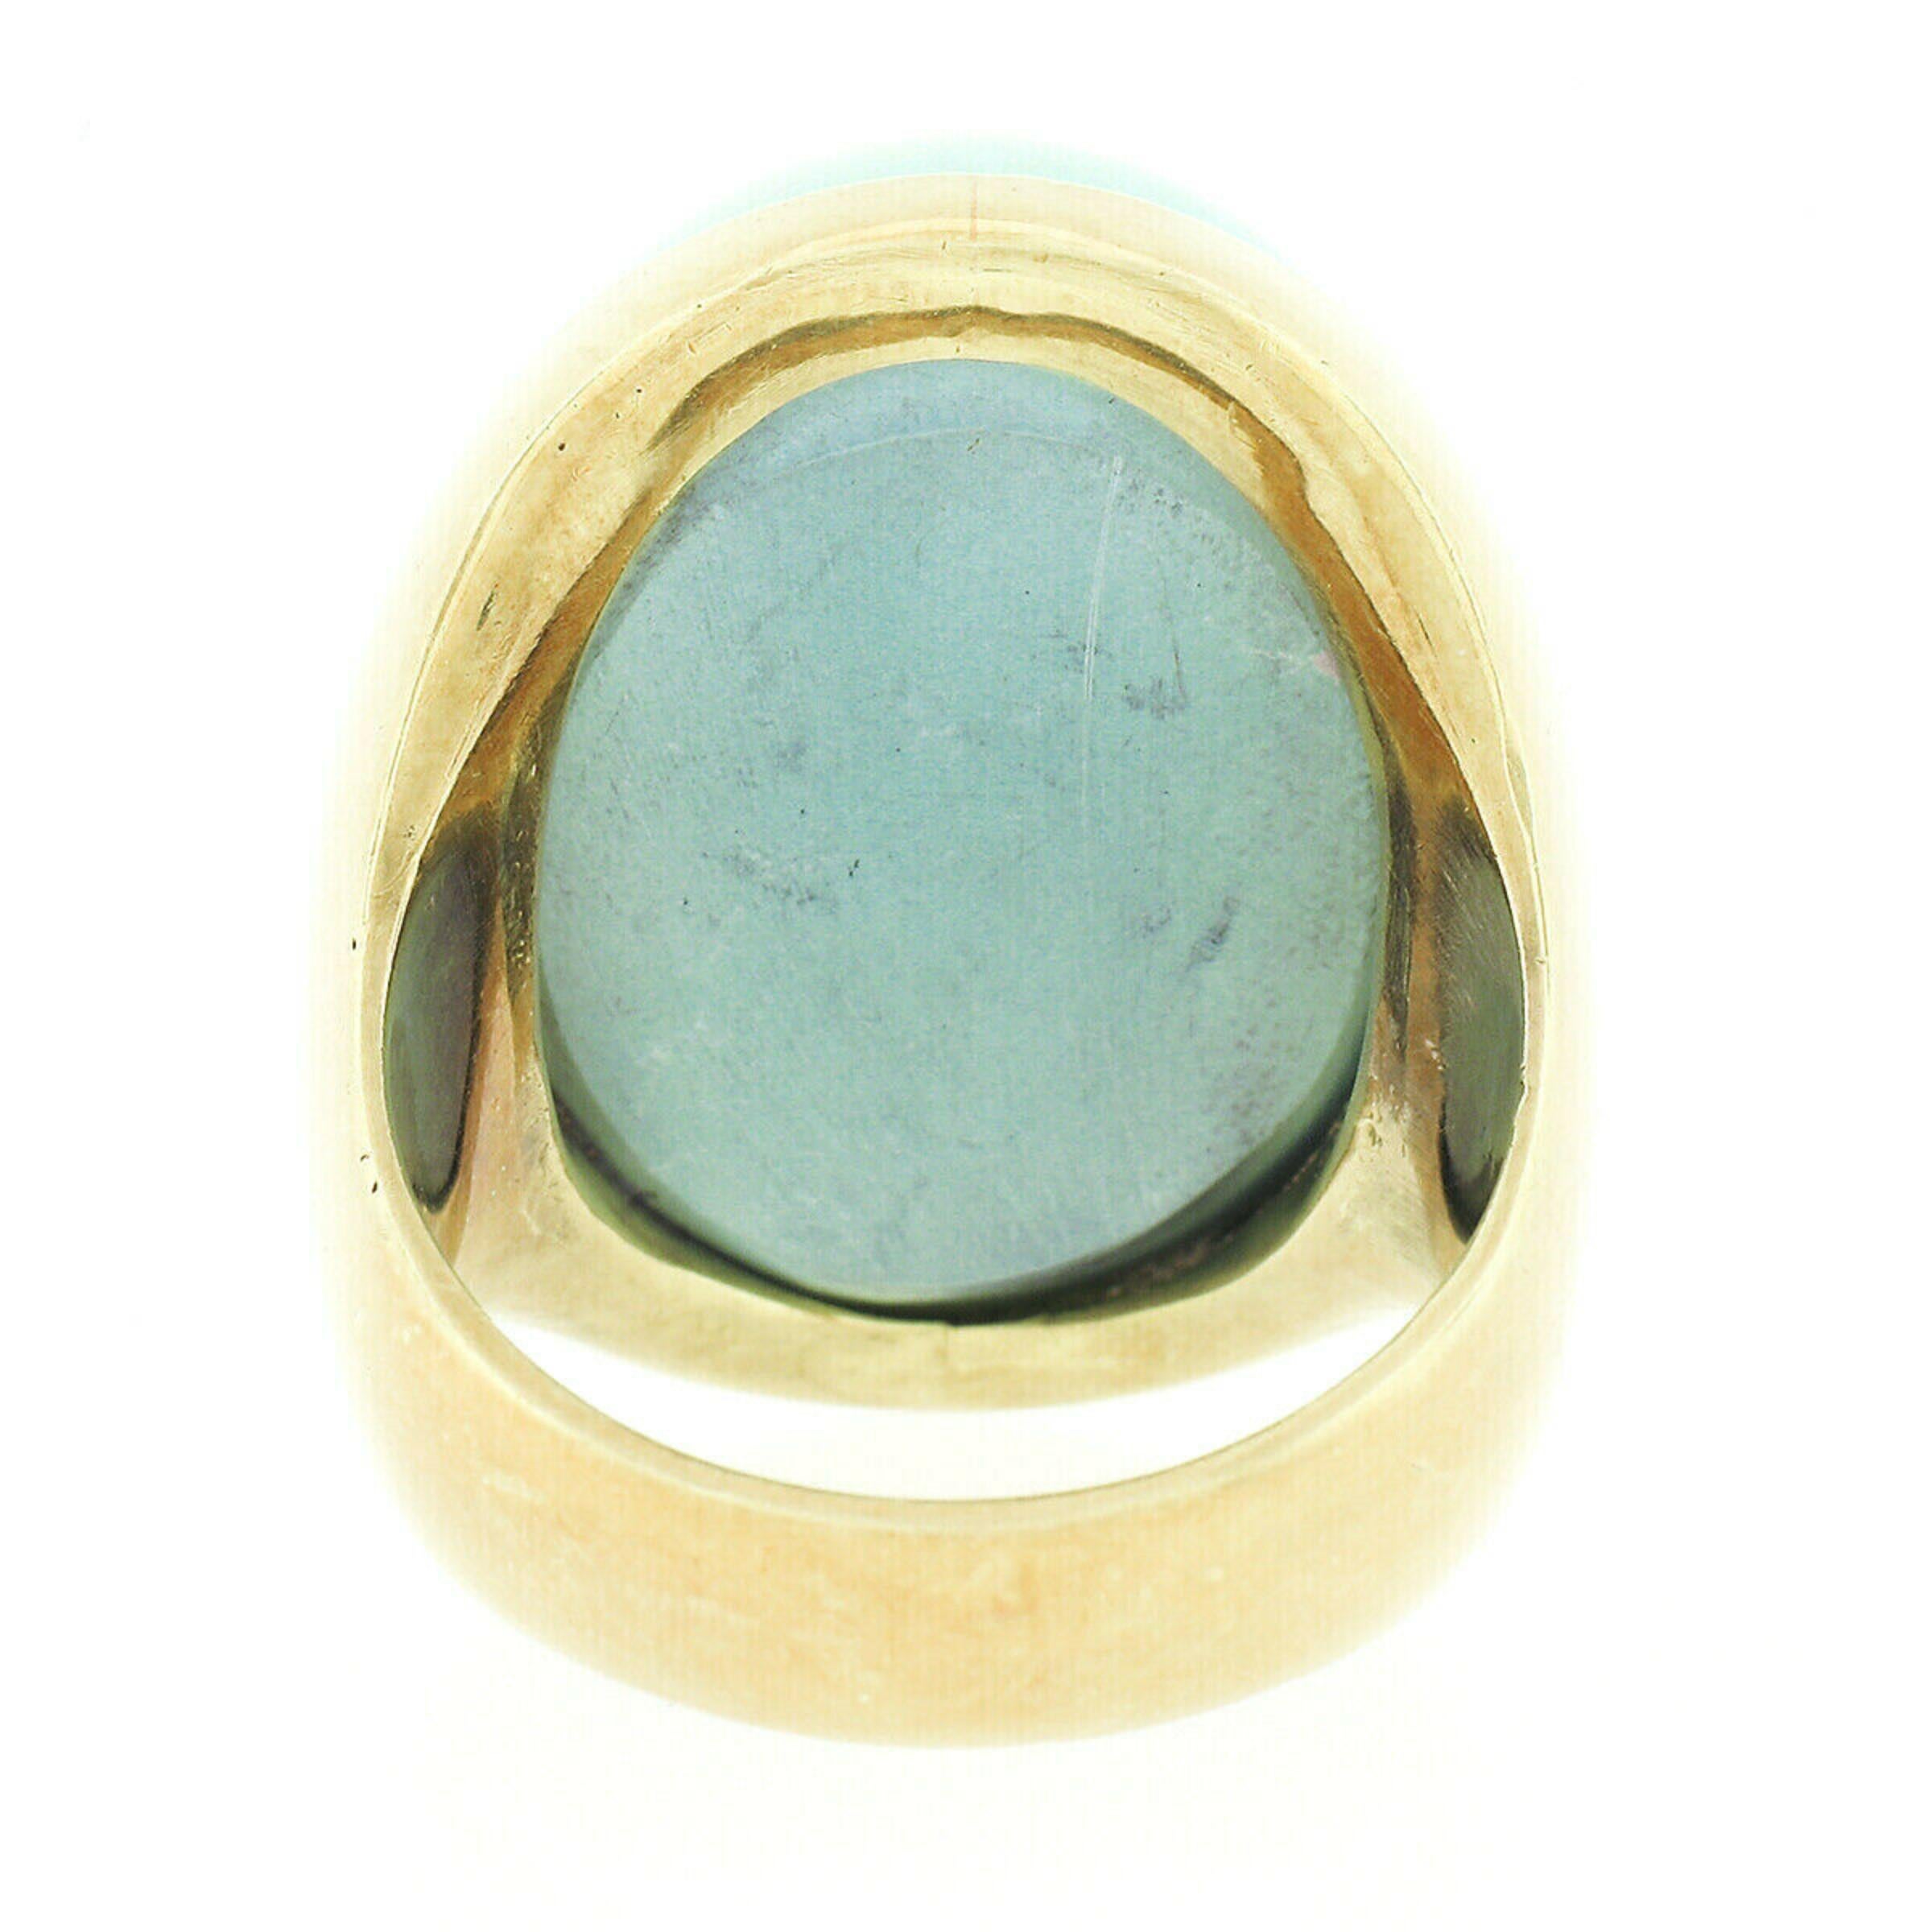 Vintage 18k Yellow Gold Large Bezel Cabochon Turquoise Solitaire Statement Ring 5